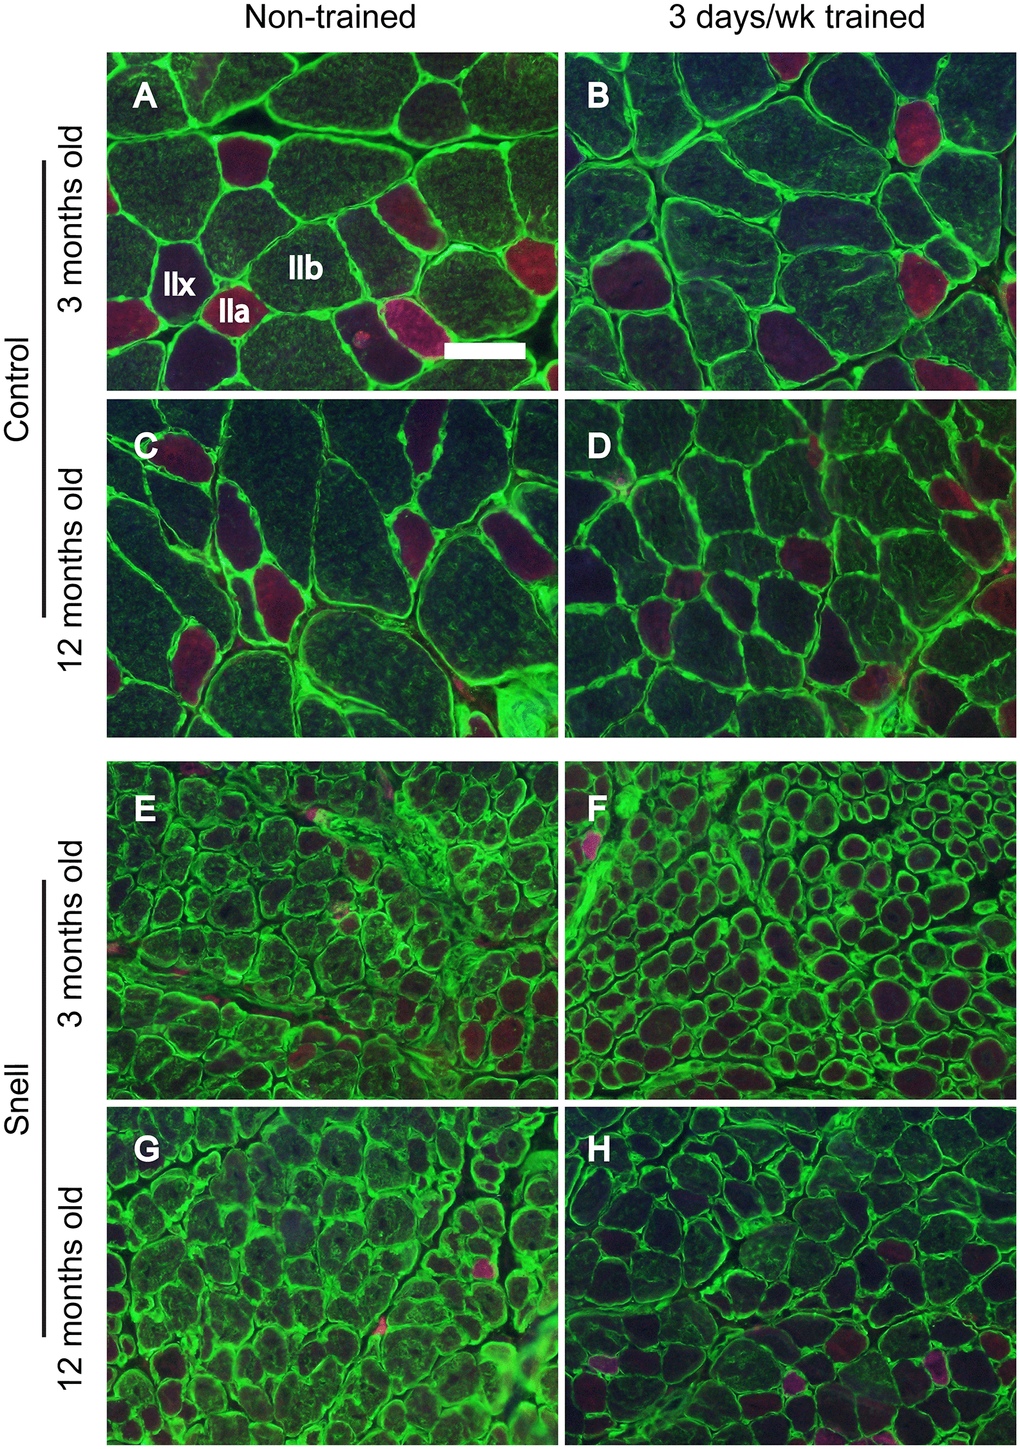 Fiber type immunofluorescence staining for muscles of control (A–D) and Snell dwarf (E–H) mice following 3 days per week training. Staining for laminin (green) and multiple MHC isoforms – IIb (green), IIa (red), and IIx (negative for staining) – are apparent in the images with shifting away from IIb to IIx with training unique to Snell dwarf mice. Scale bar = 50 μm.